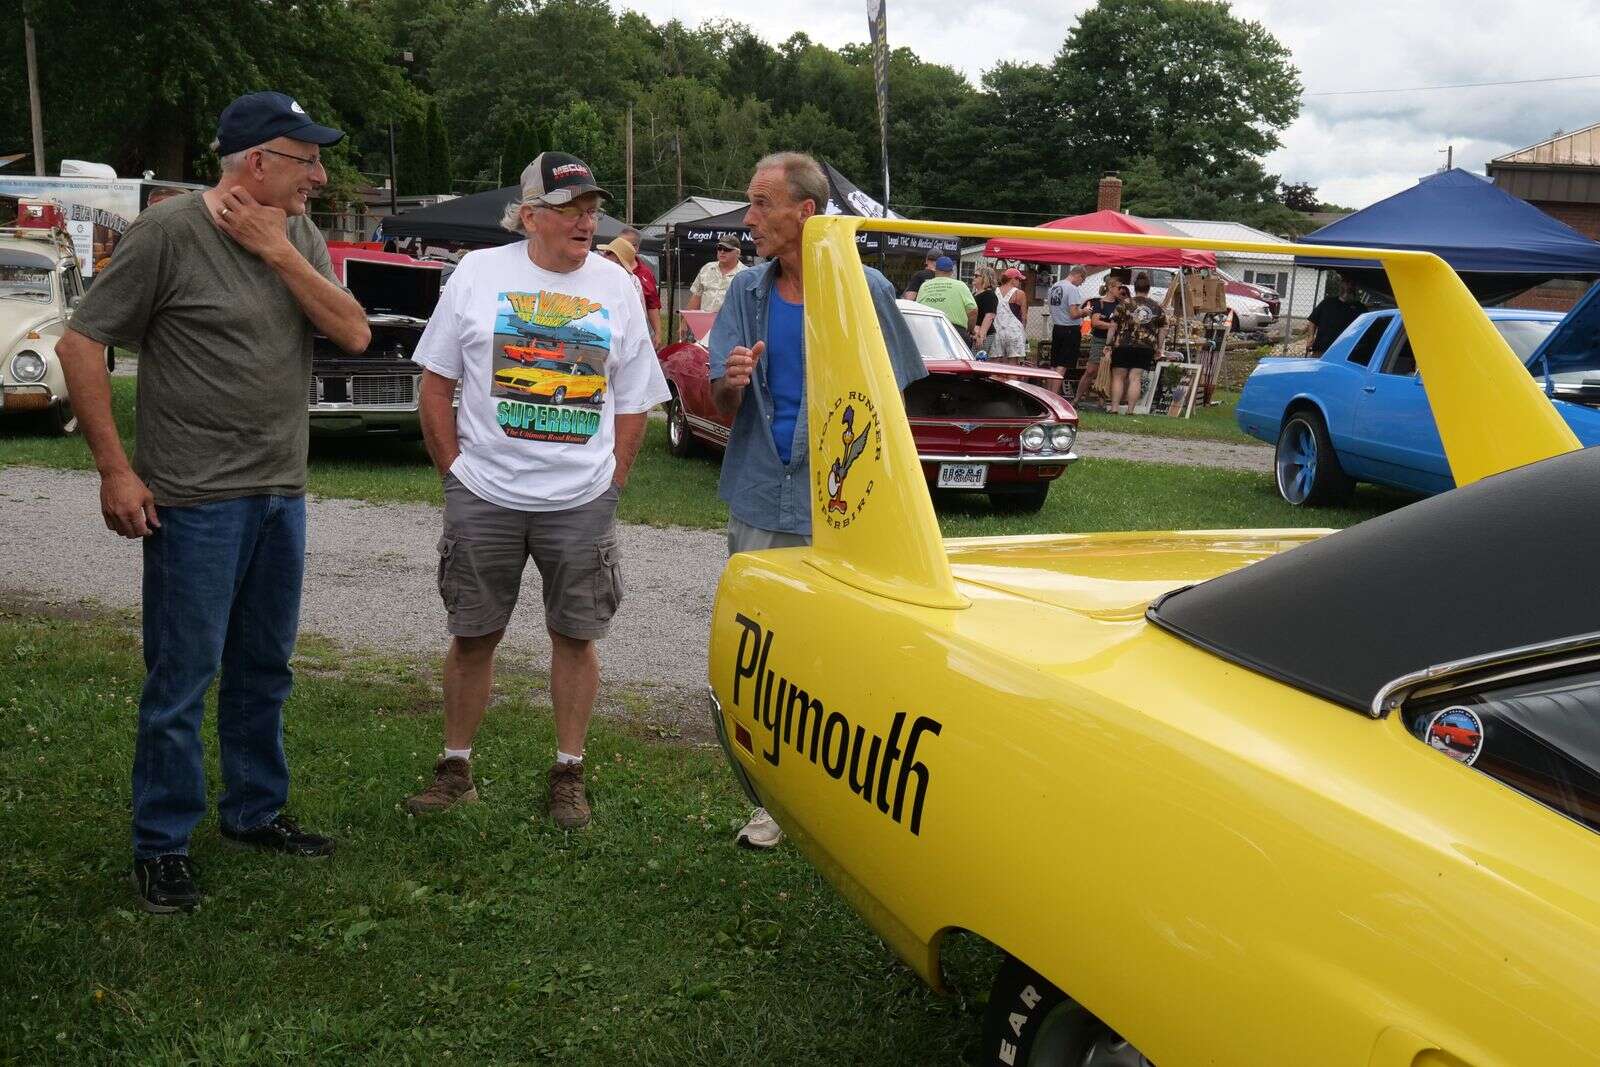 Rumble Car Show heads to Saxonburg for the first time – Butler Eagle